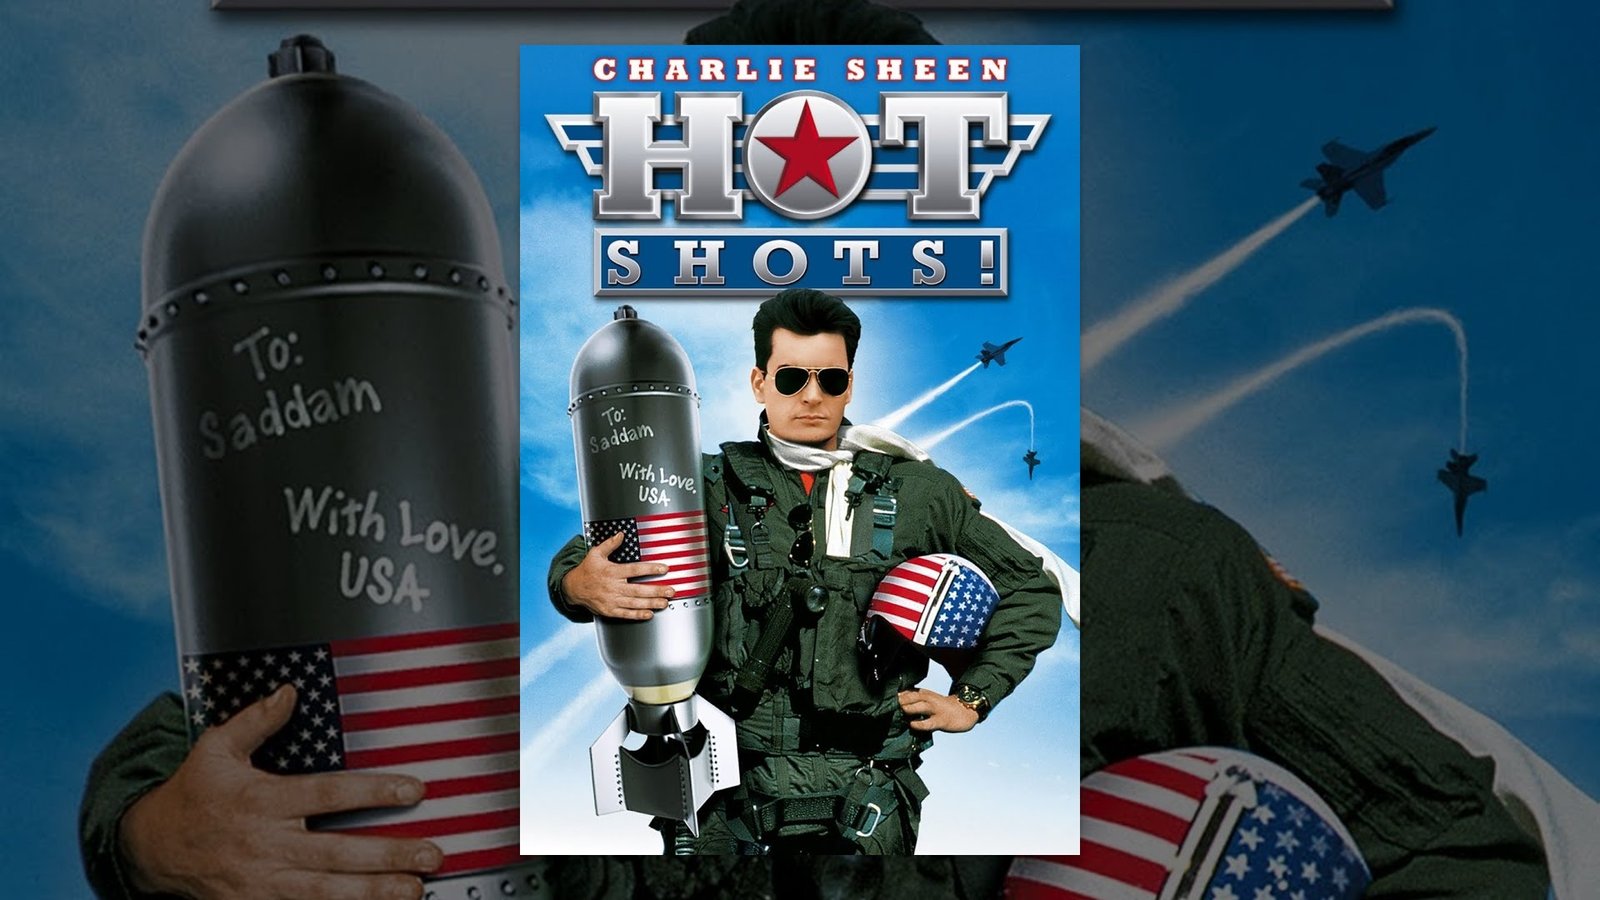 A Behind-the-Scenes Look at the “Hot Shots” Franchise